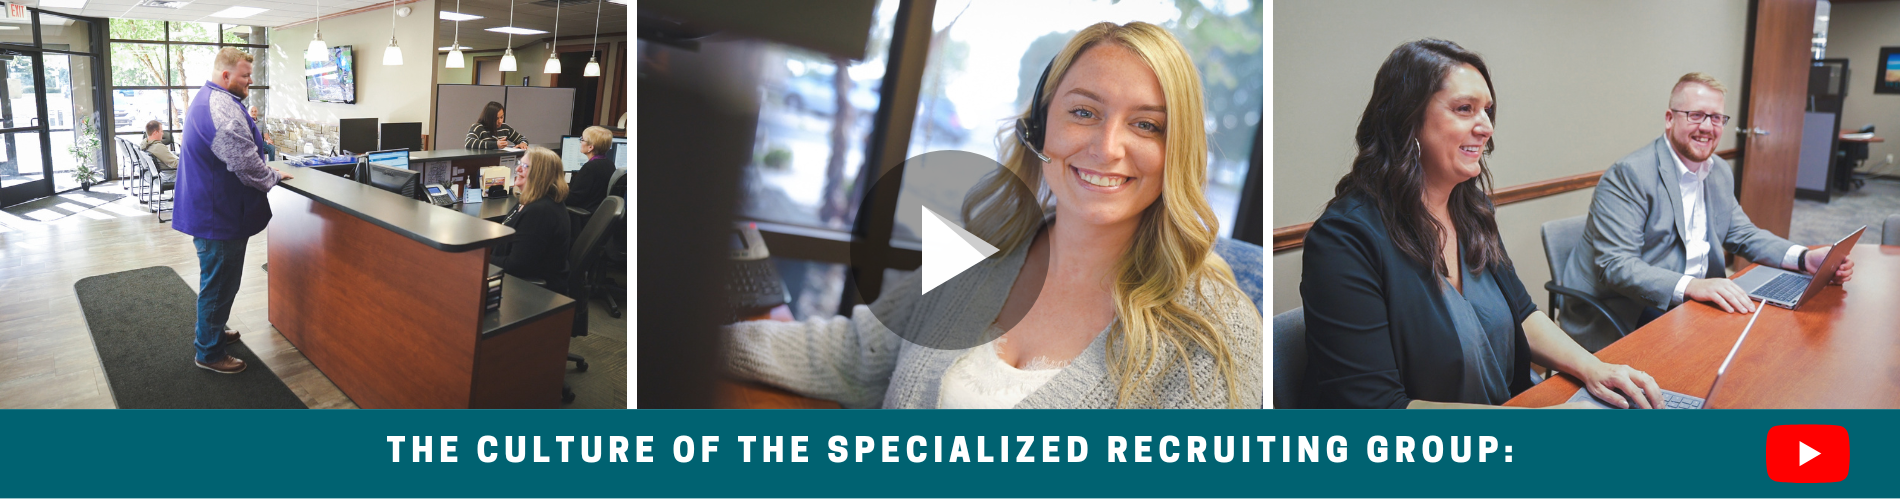 Specialized Recruiting Group Culture Video